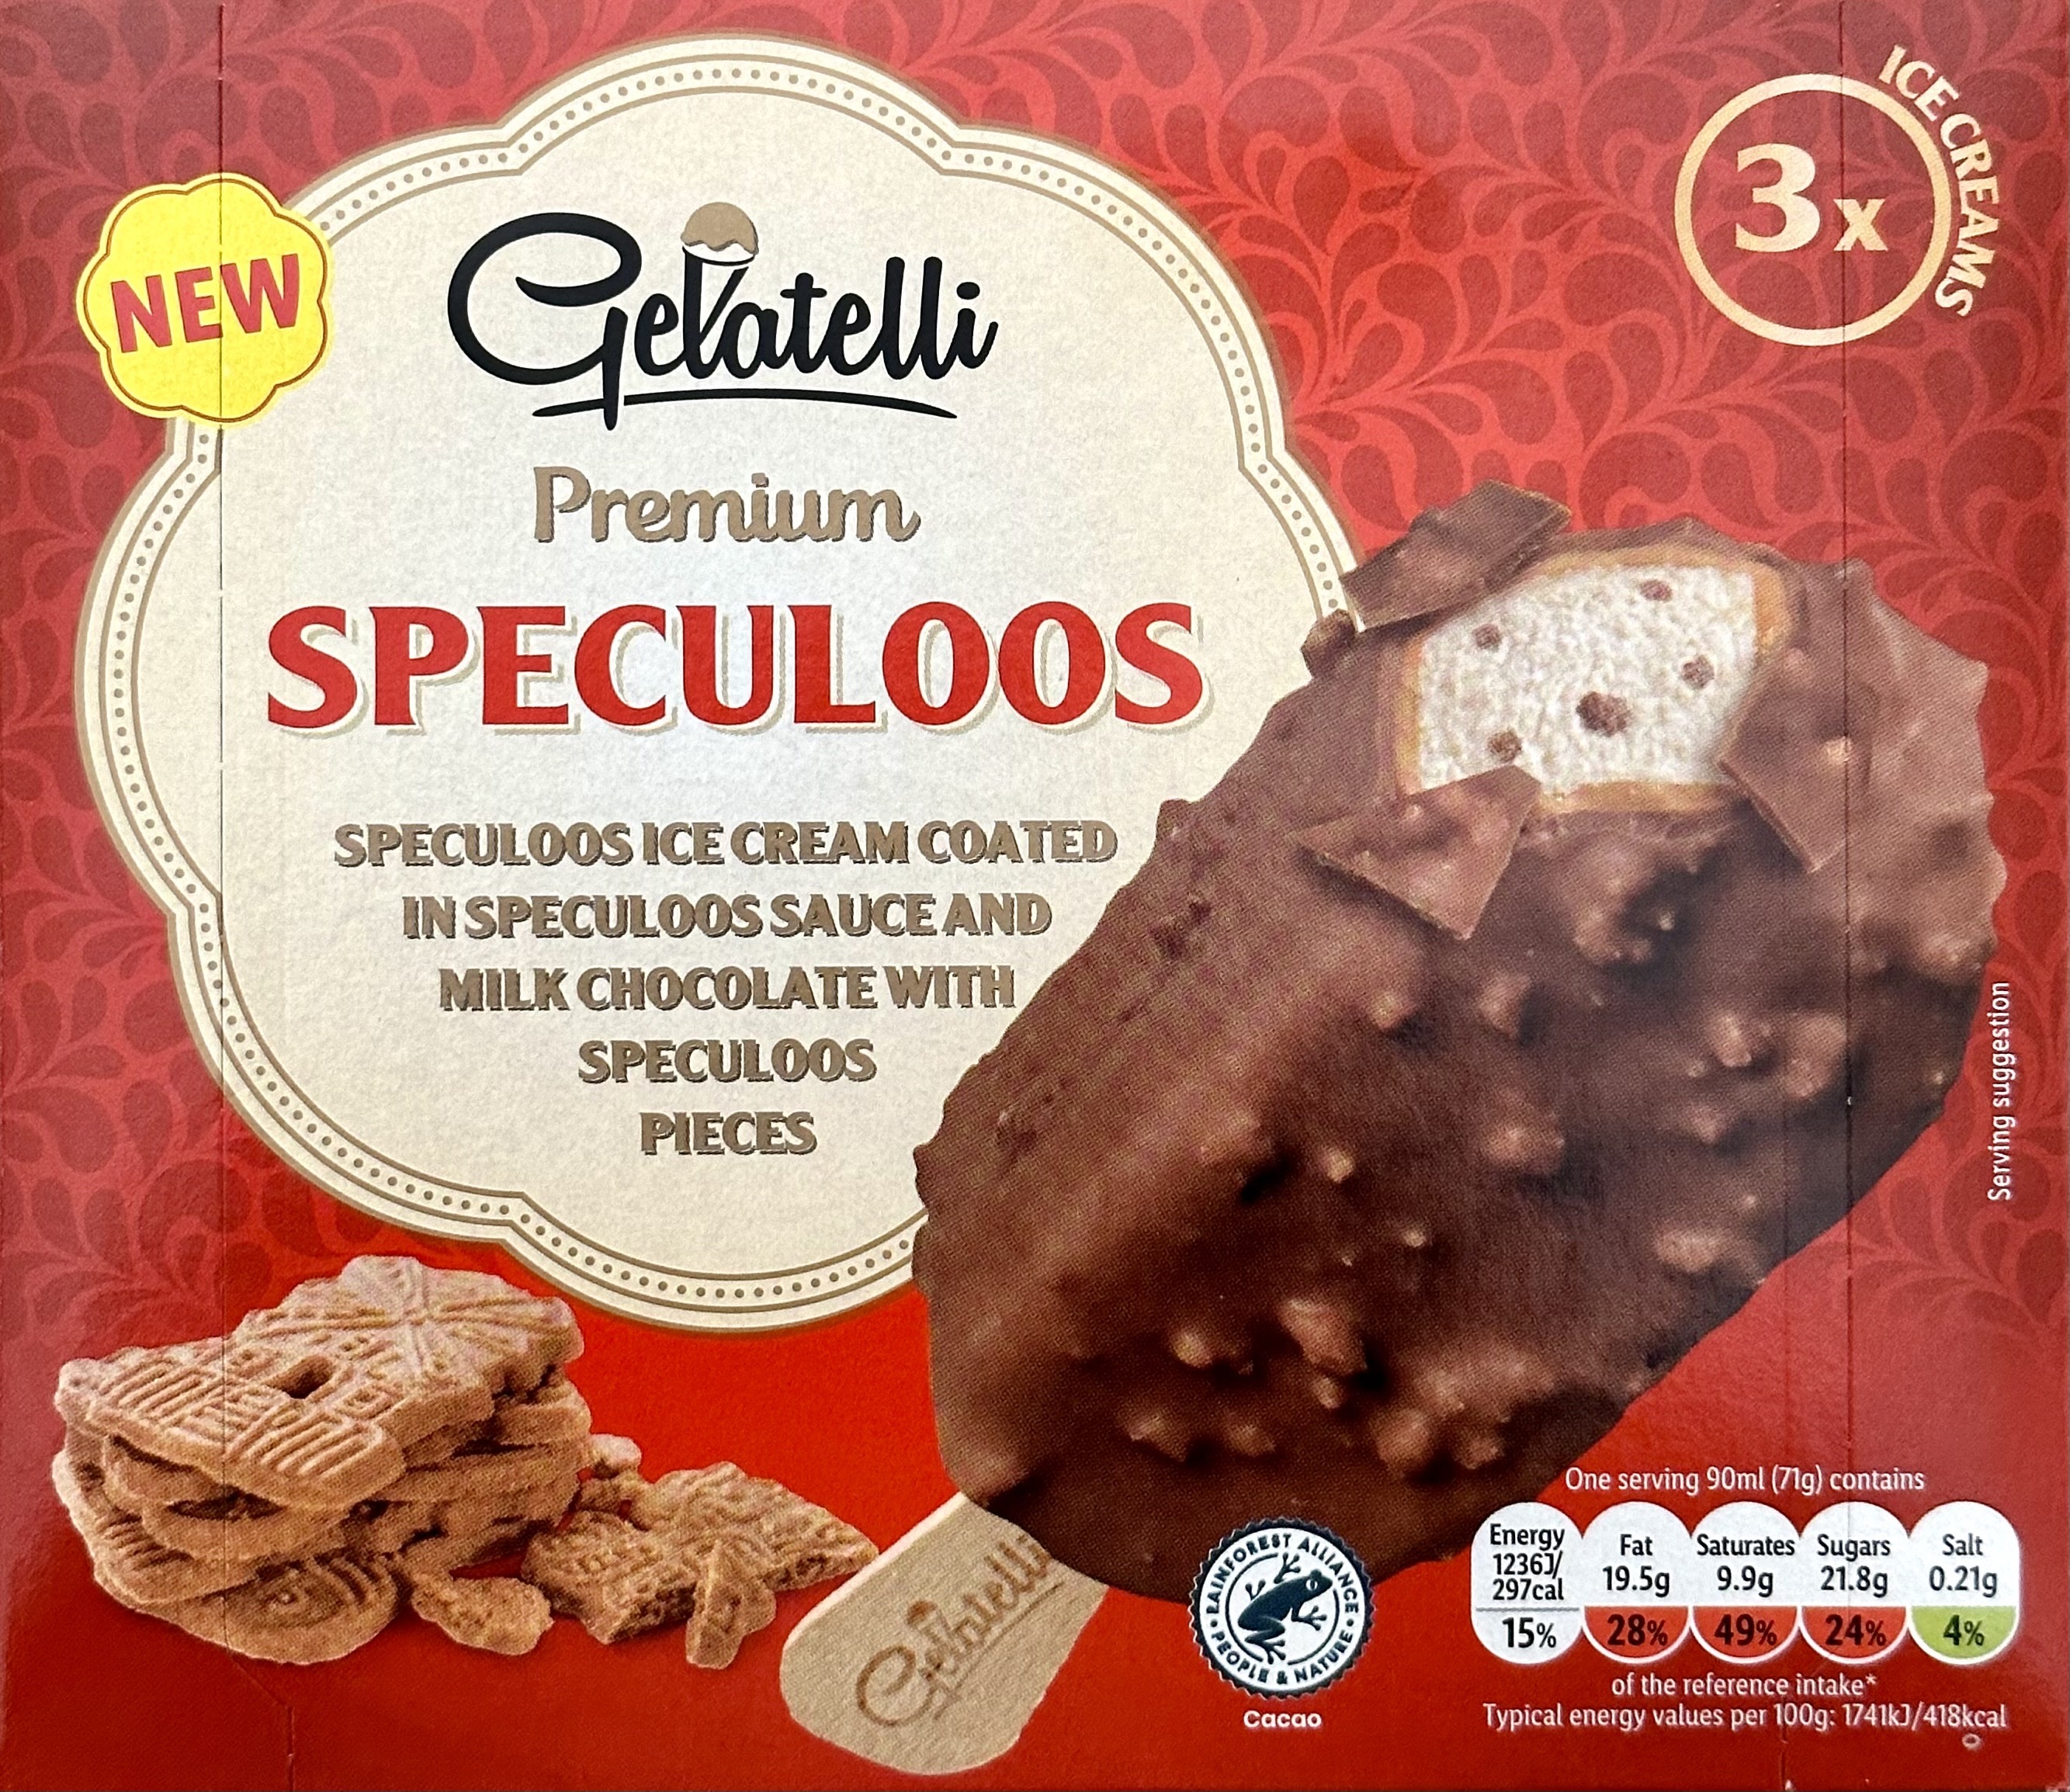 Get a pack of Gelatelli Premium Speculoos ice creams for £2.49 at Lidl